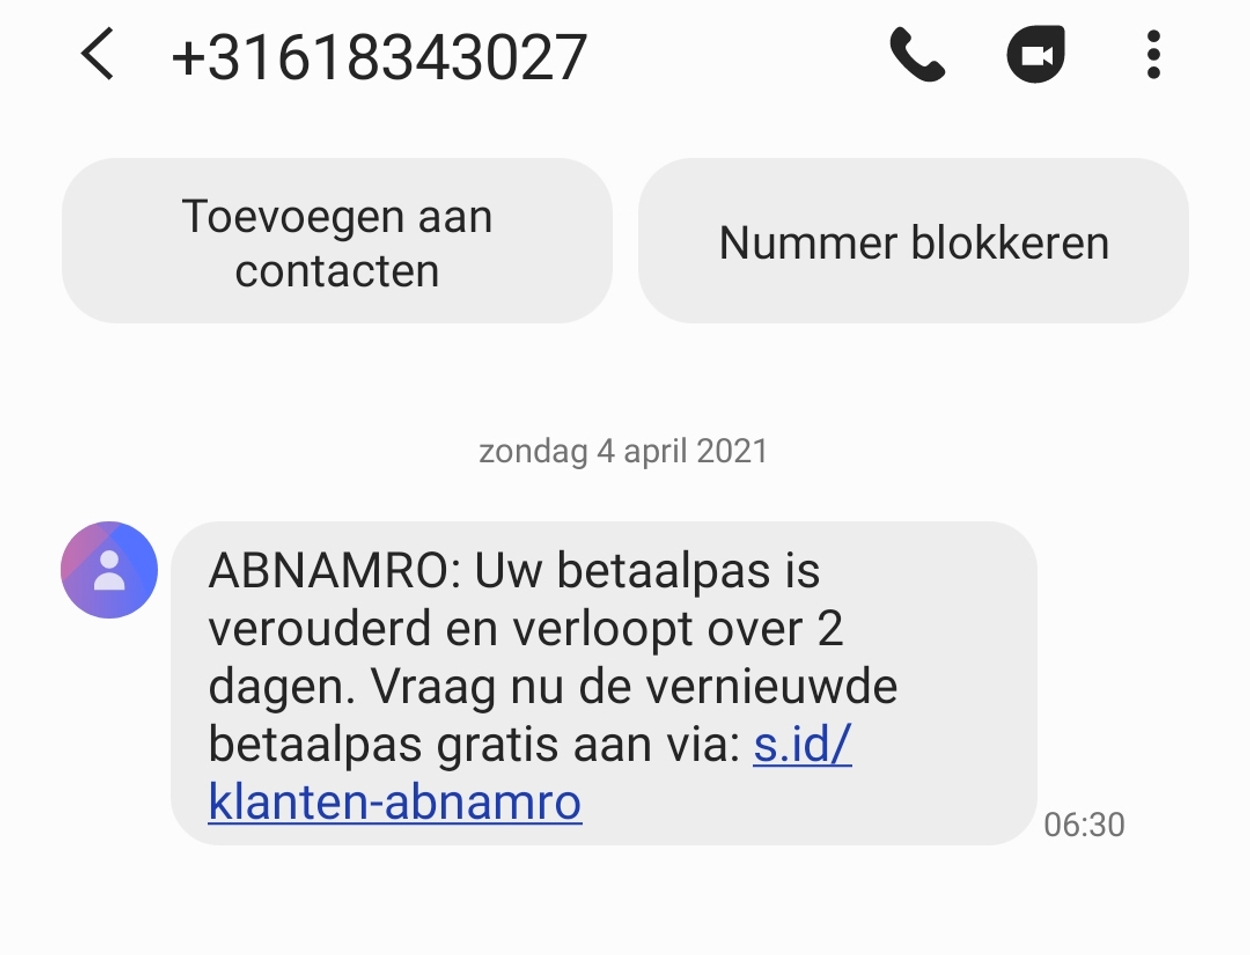 phishing sms abn armo april 2021